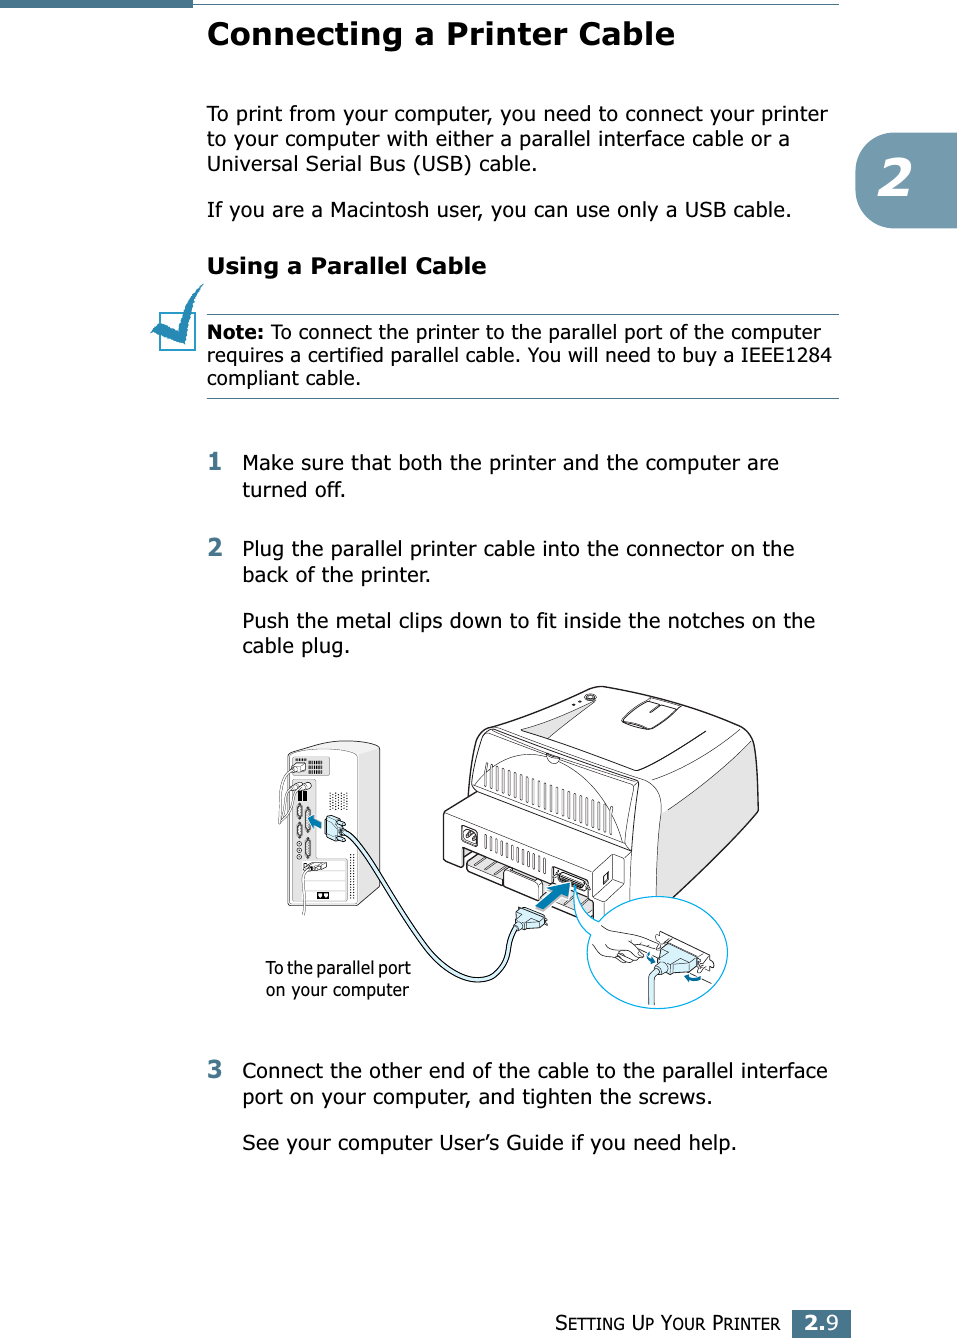 SETTING UP YOUR PRINTER2.92Connecting a Printer CableTo print from your computer, you need to connect your printer to your computer with either a parallel interface cable or a Universal Serial Bus (USB) cable. If you are a Macintosh user, you can use only a USB cable. Using a Parallel CableNote: To connect the printer to the parallel port of the computer requires a certified parallel cable. You will need to buy a IEEE1284 compliant cable.1Make sure that both the printer and the computer are turned off.2Plug the parallel printer cable into the connector on the back of the printer. Push the metal clips down to fit inside the notches on the cable plug.3Connect the other end of the cable to the parallel interface port on your computer, and tighten the screws. See your computer User’s Guide if you need help.To the parallel port on your computer